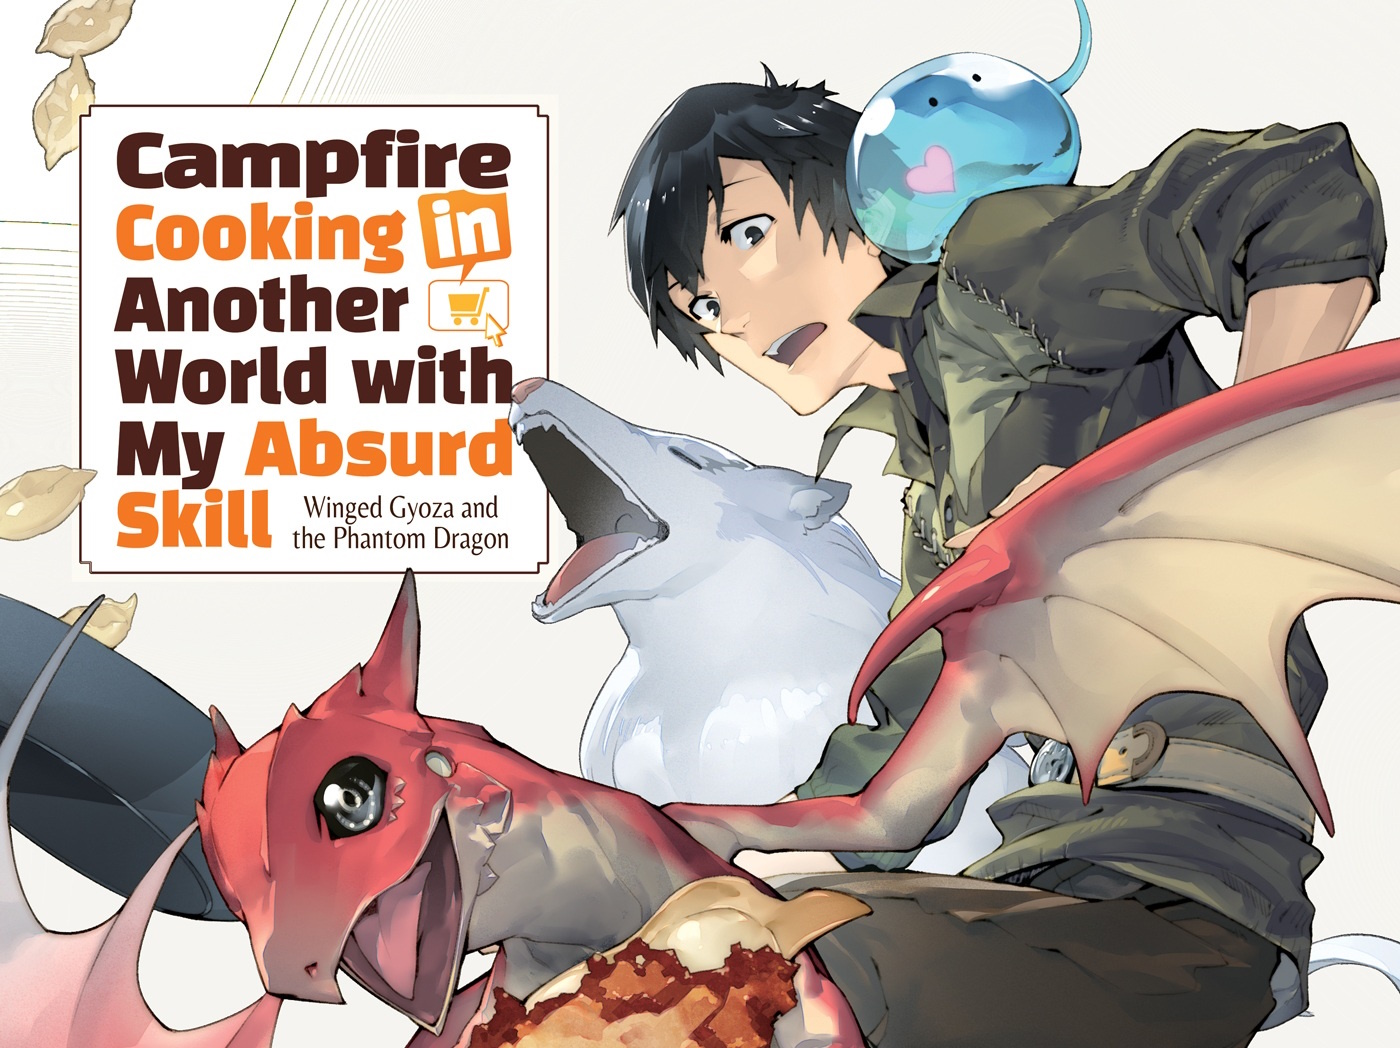 Ver Campfire Cooking in Another World with my Absurd Skill: Season 1